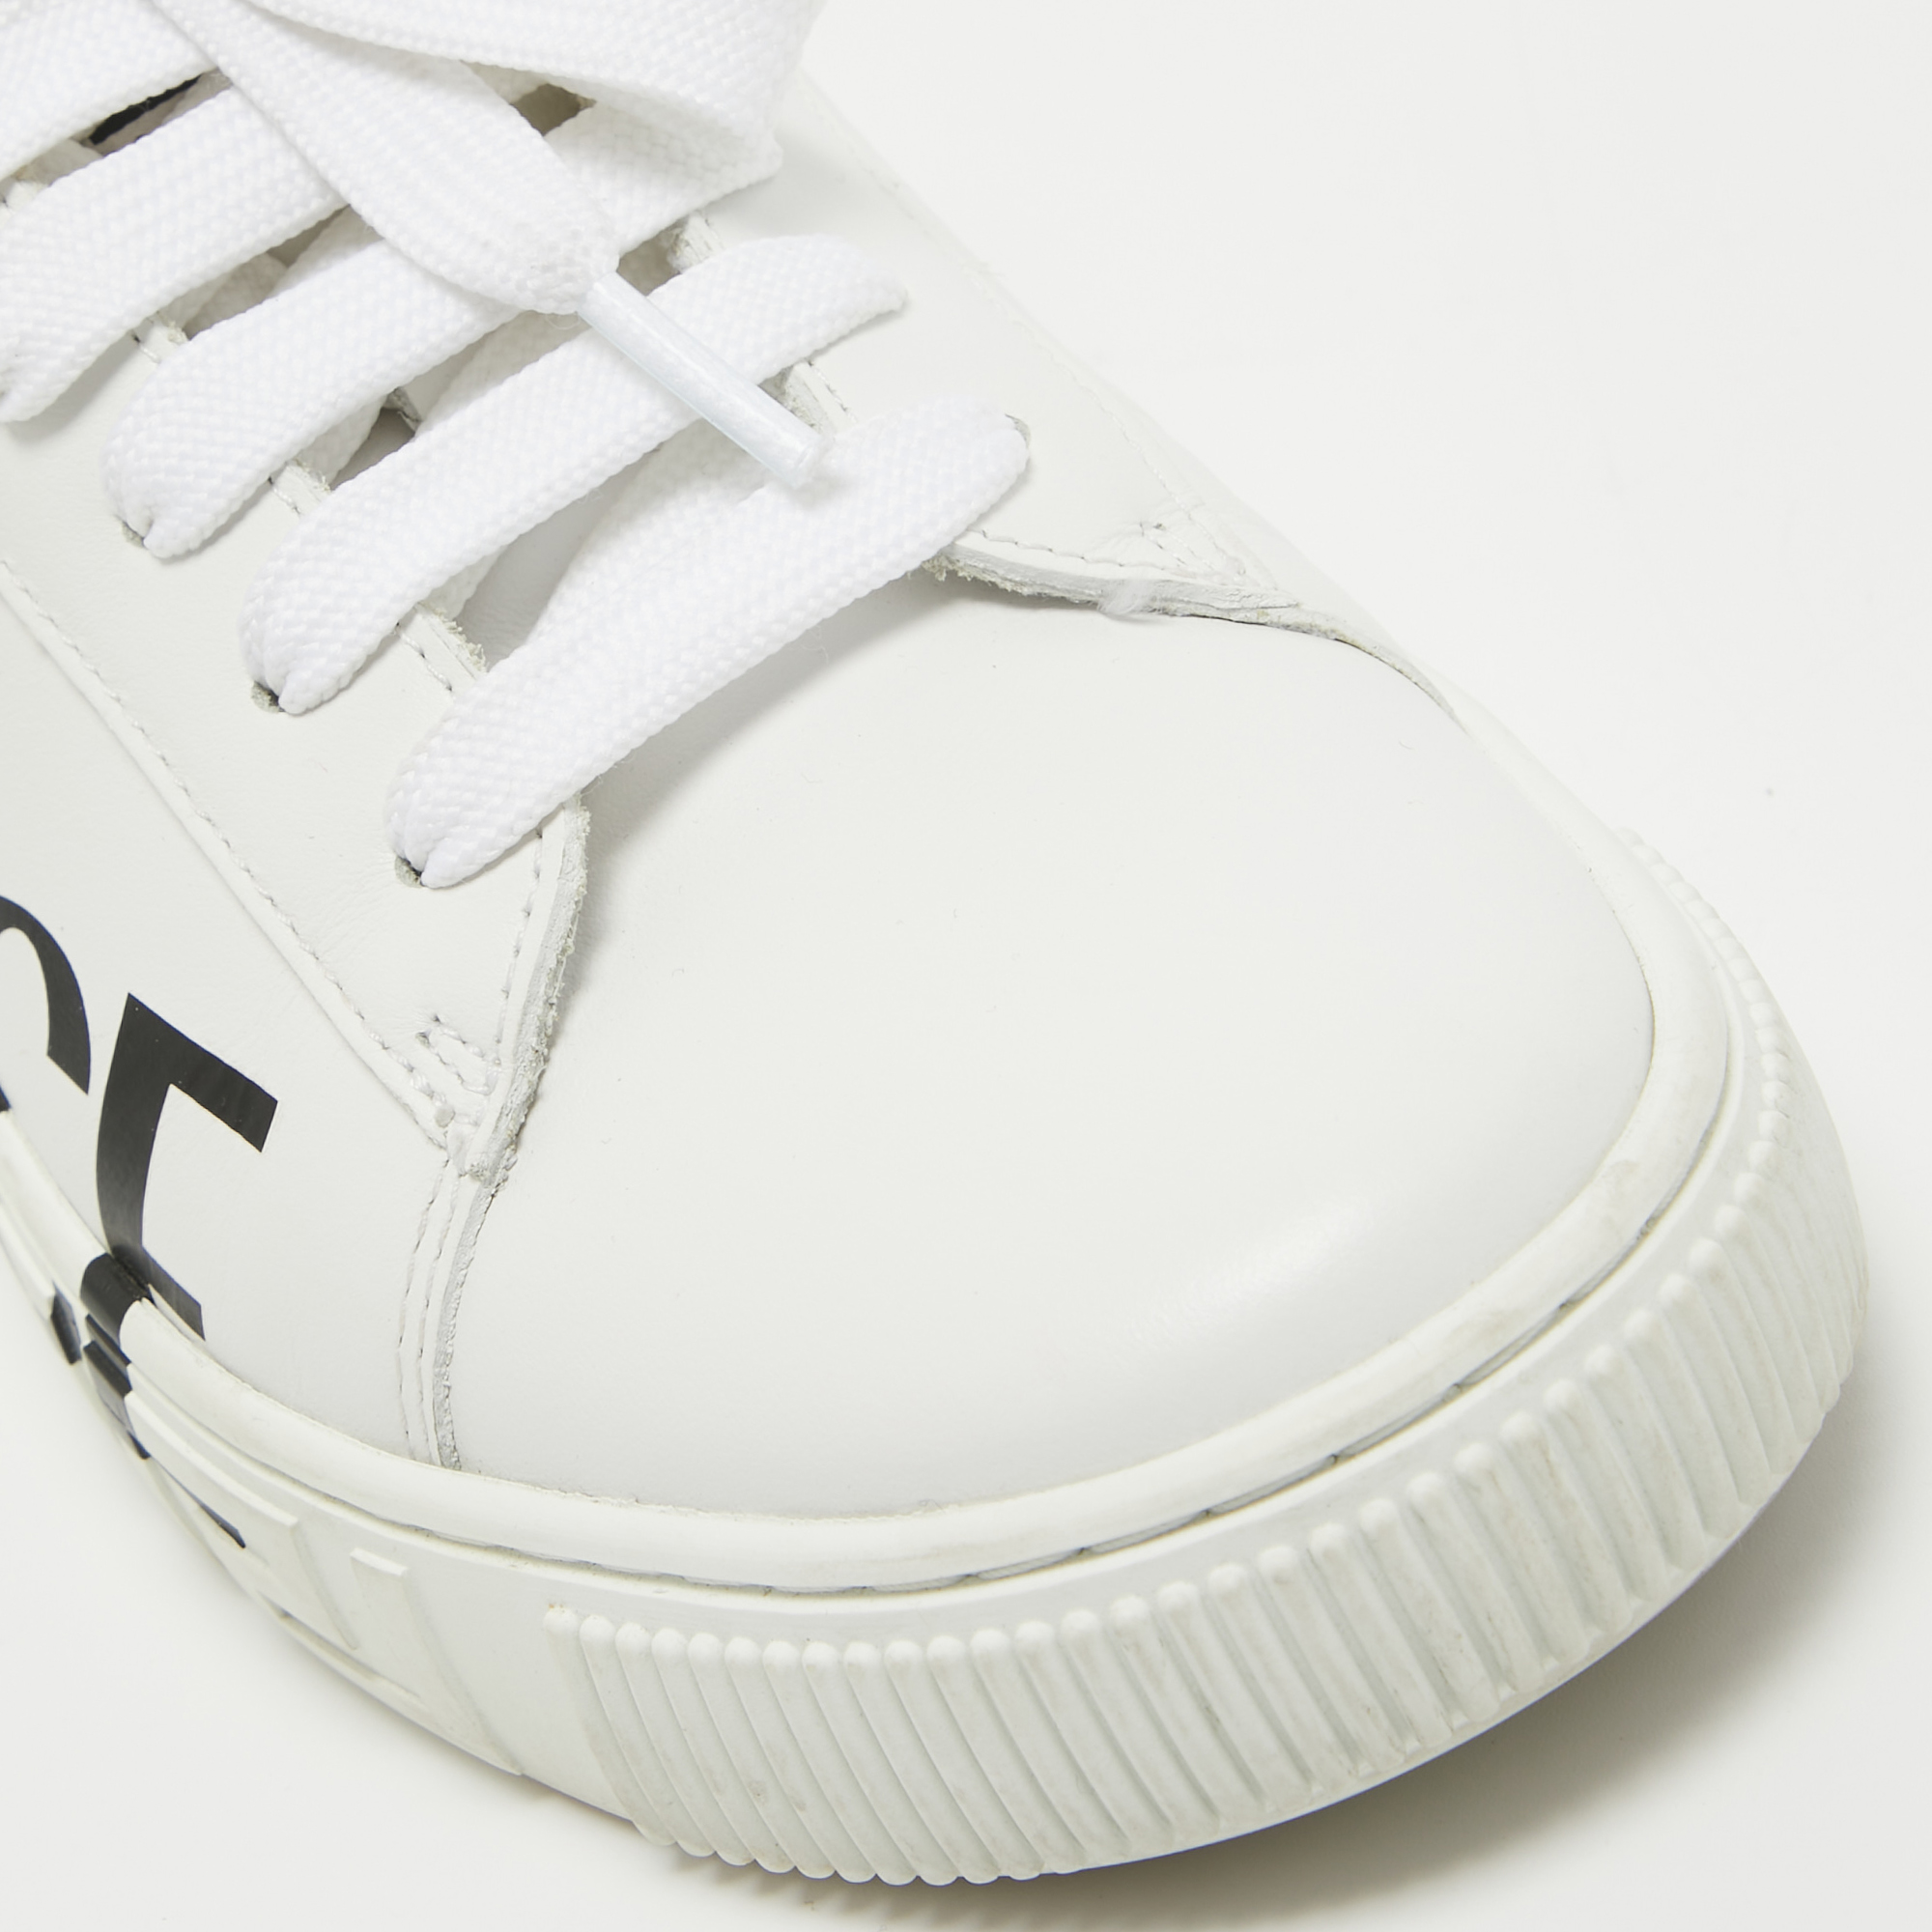 Versace White Leather Low Top Sneakers Size 37